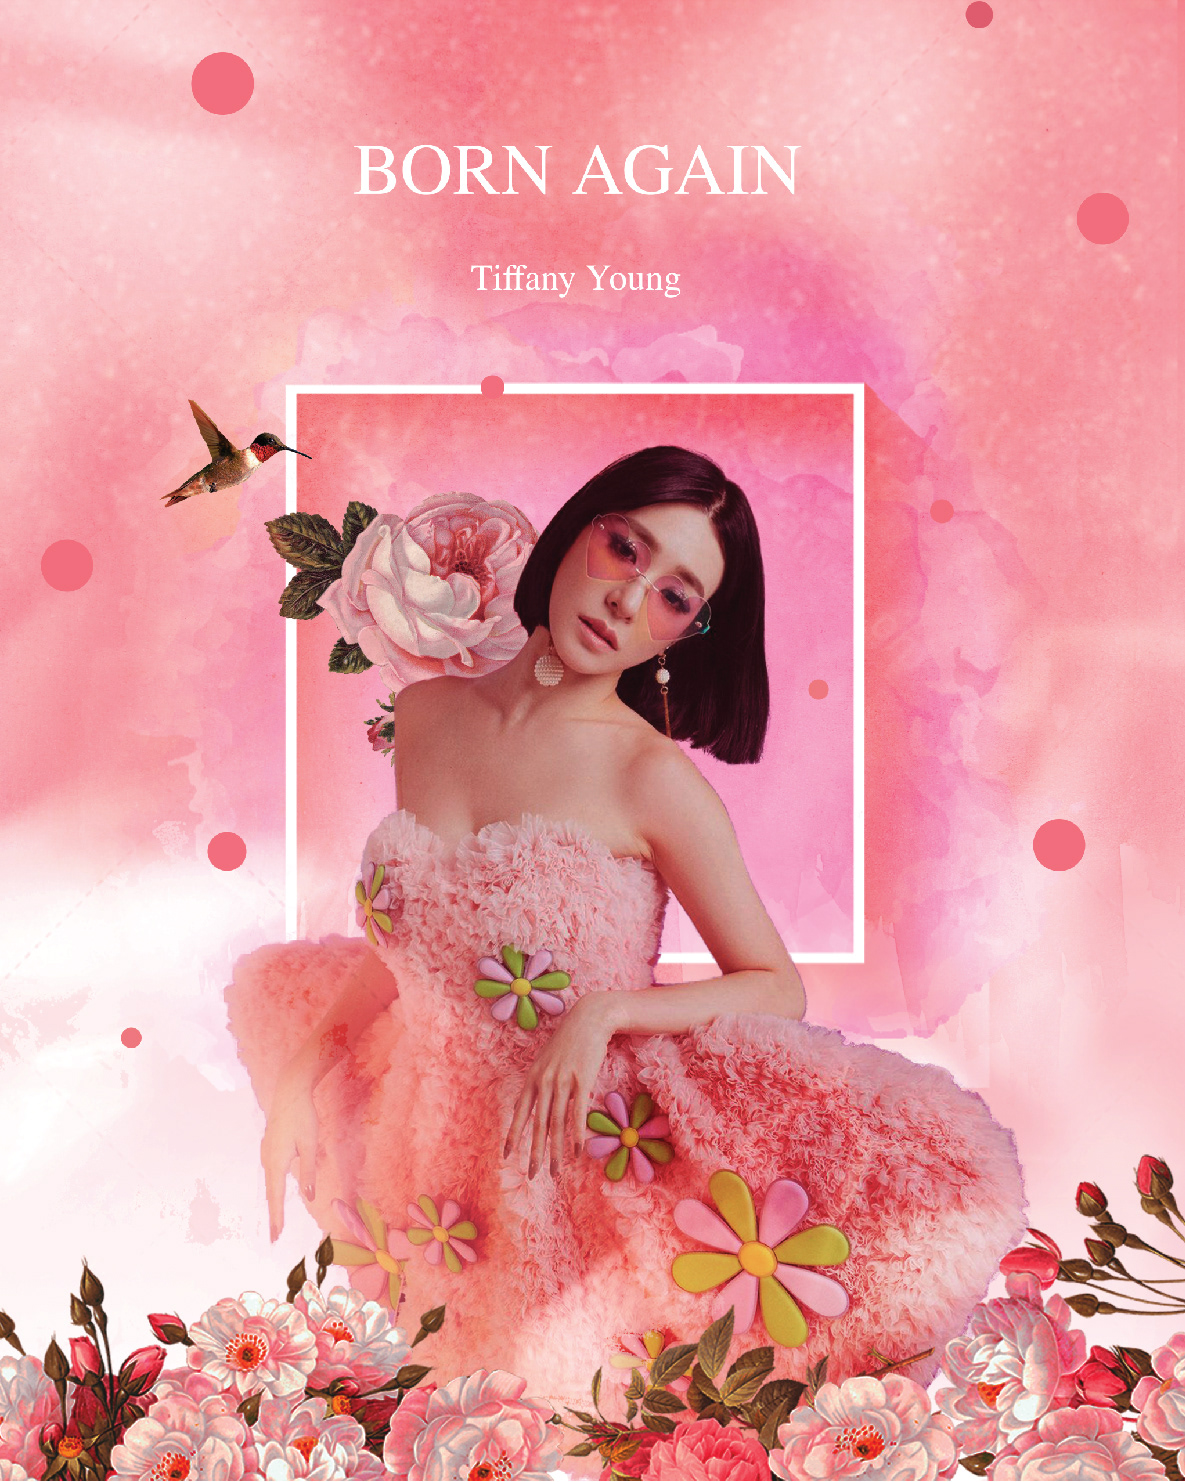 TiffanyYoung graphicdesign Editing  pink photoshop cover Album design art Singer